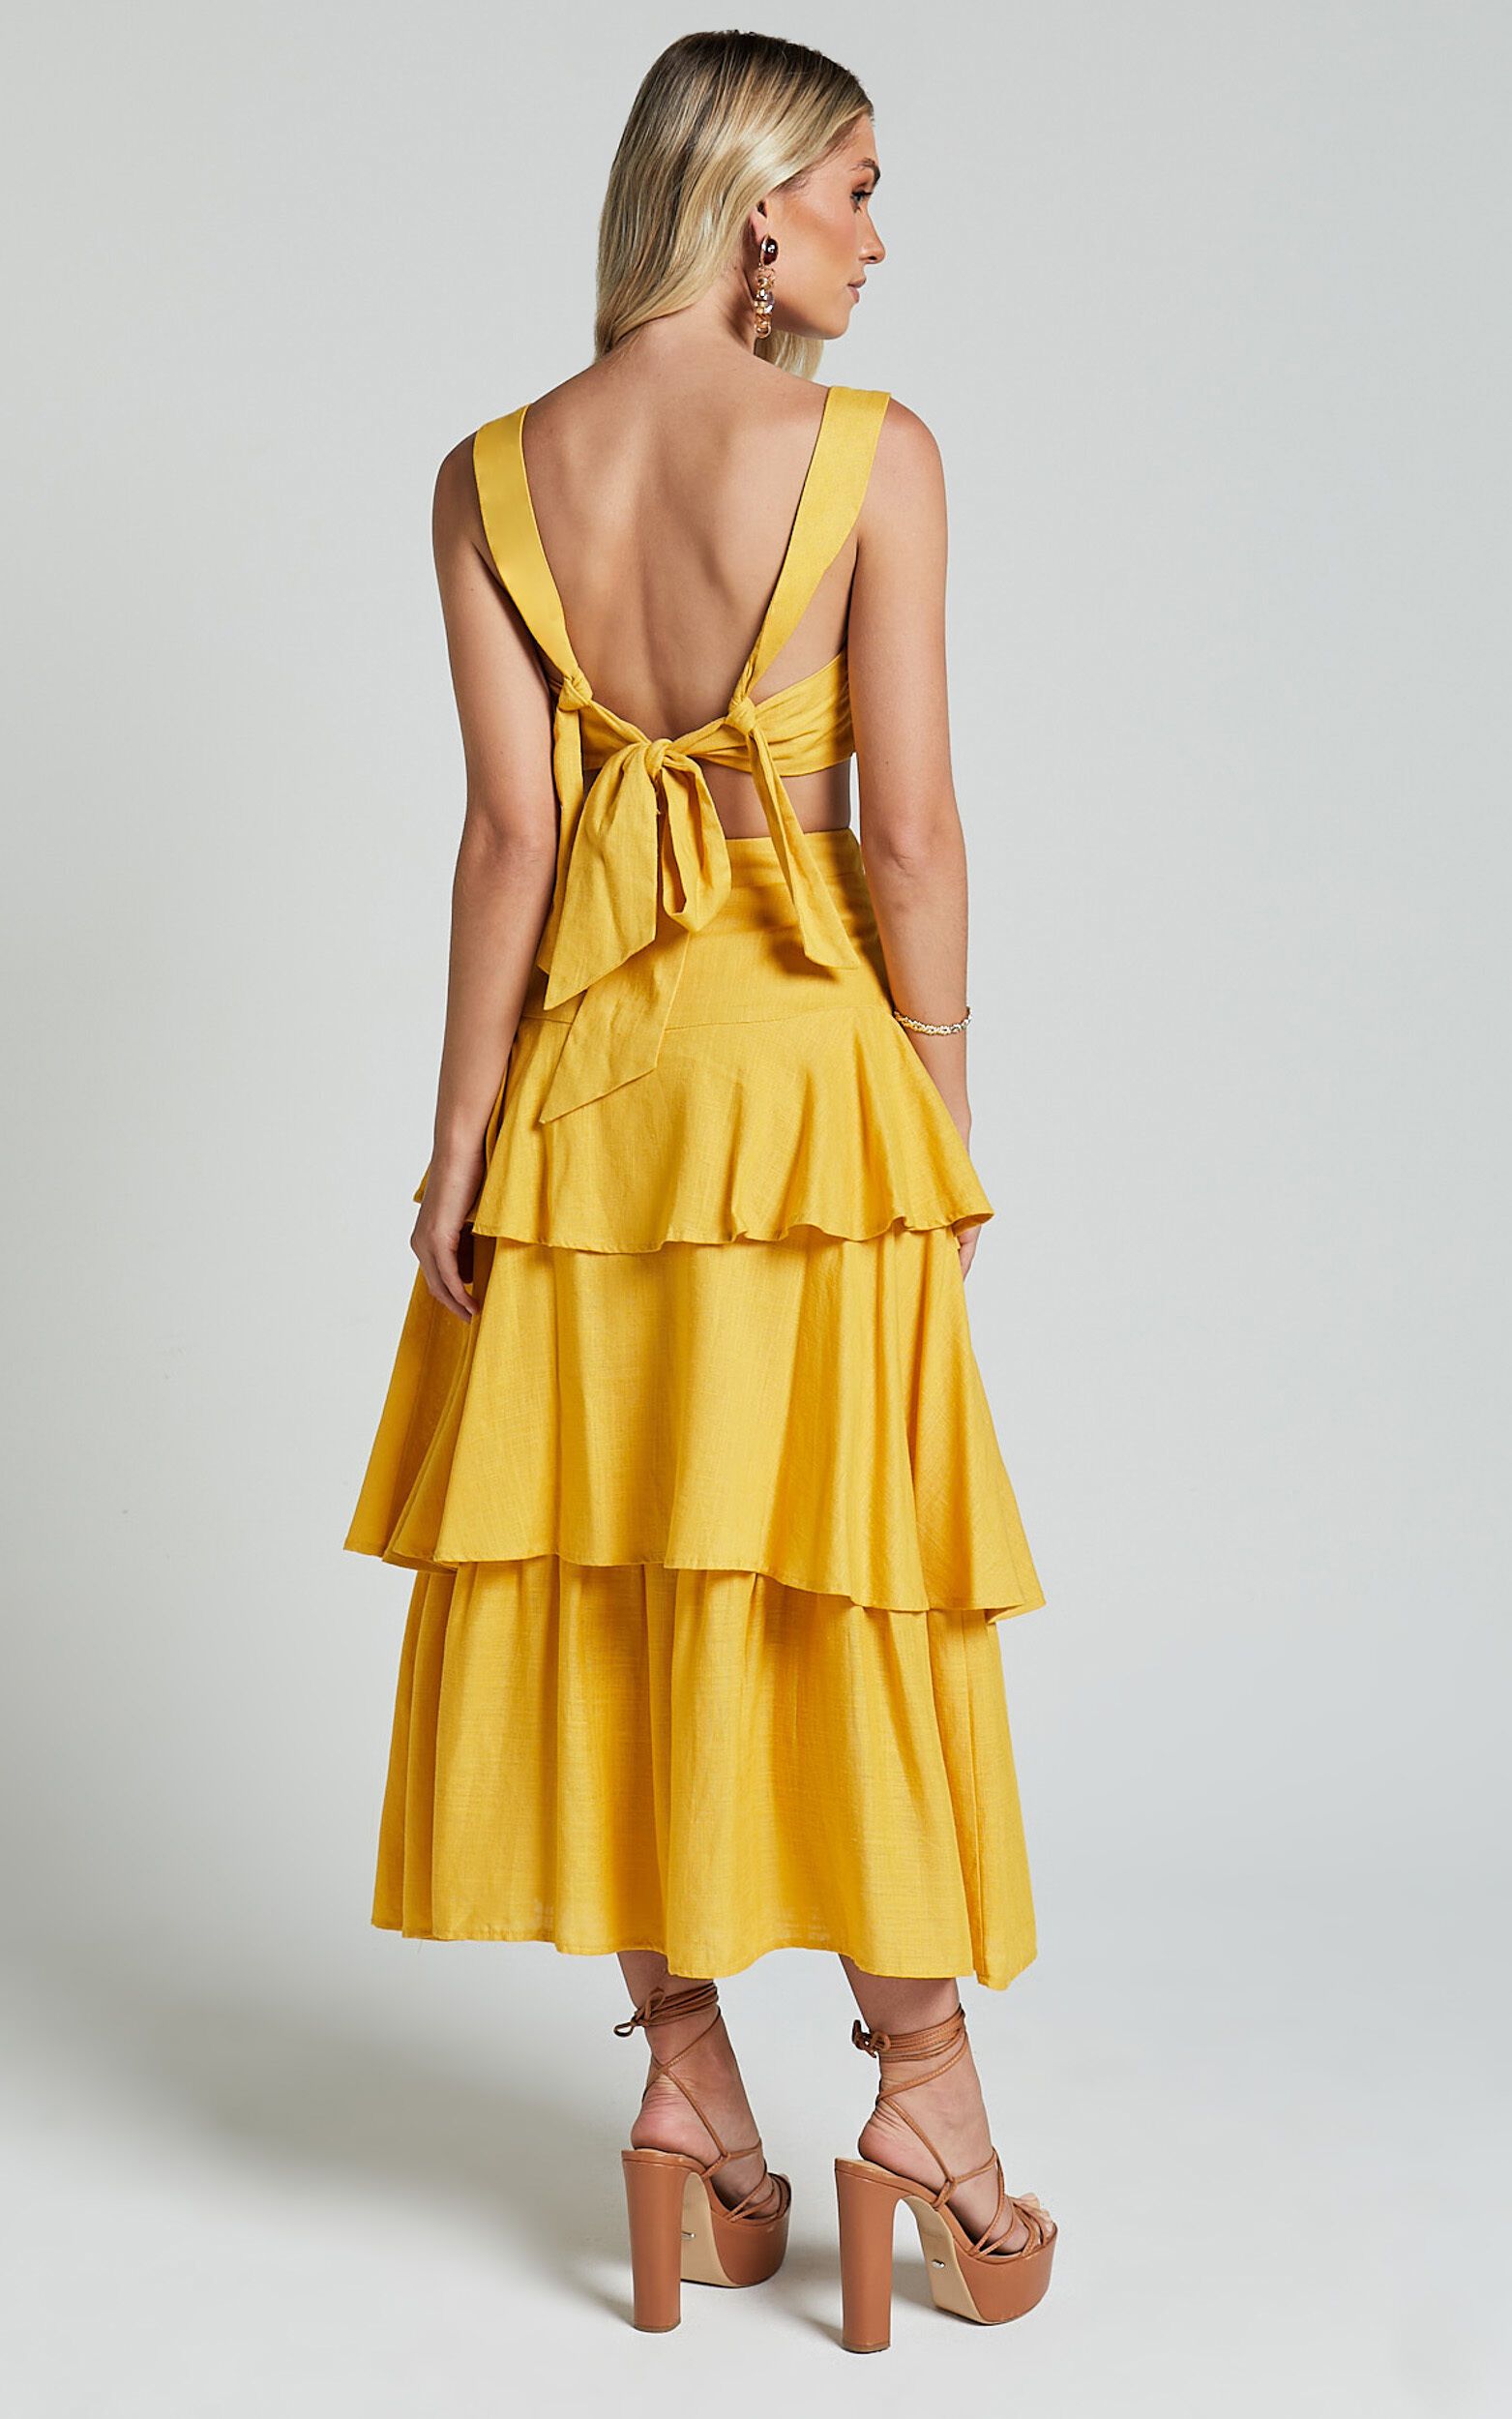 Amalie The Label - Kaleigh Linen Blend Bralette and Tiered Maxi Skirt Two Piece Set in Yellow | Showpo (ANZ)